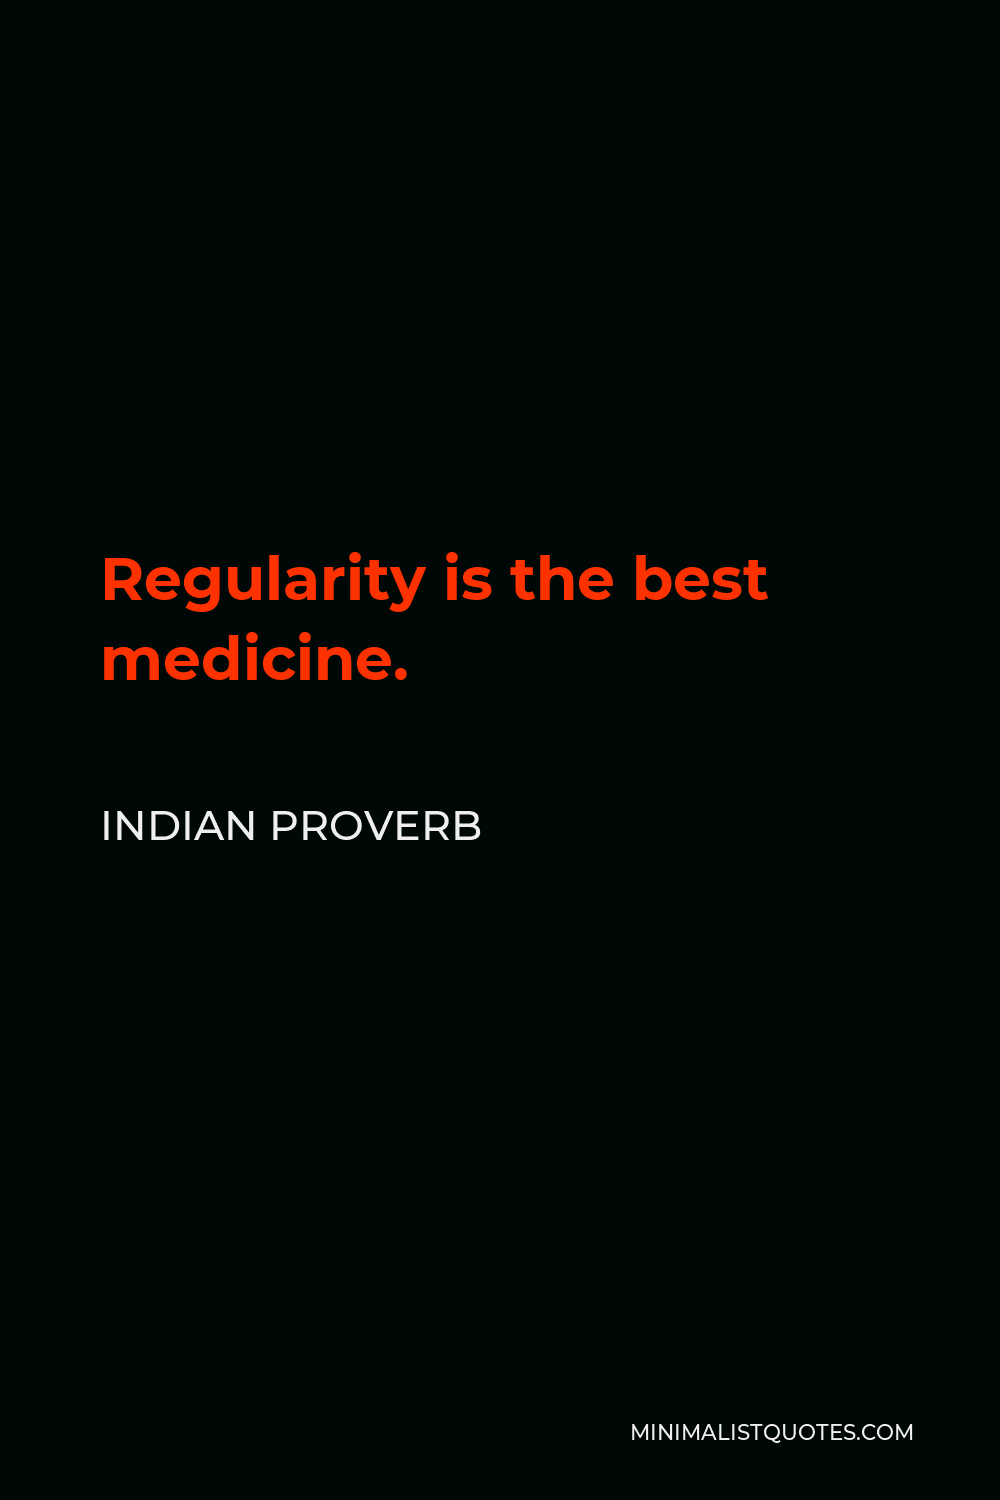 Indian Proverb Quote - Regularity is the best medicine.